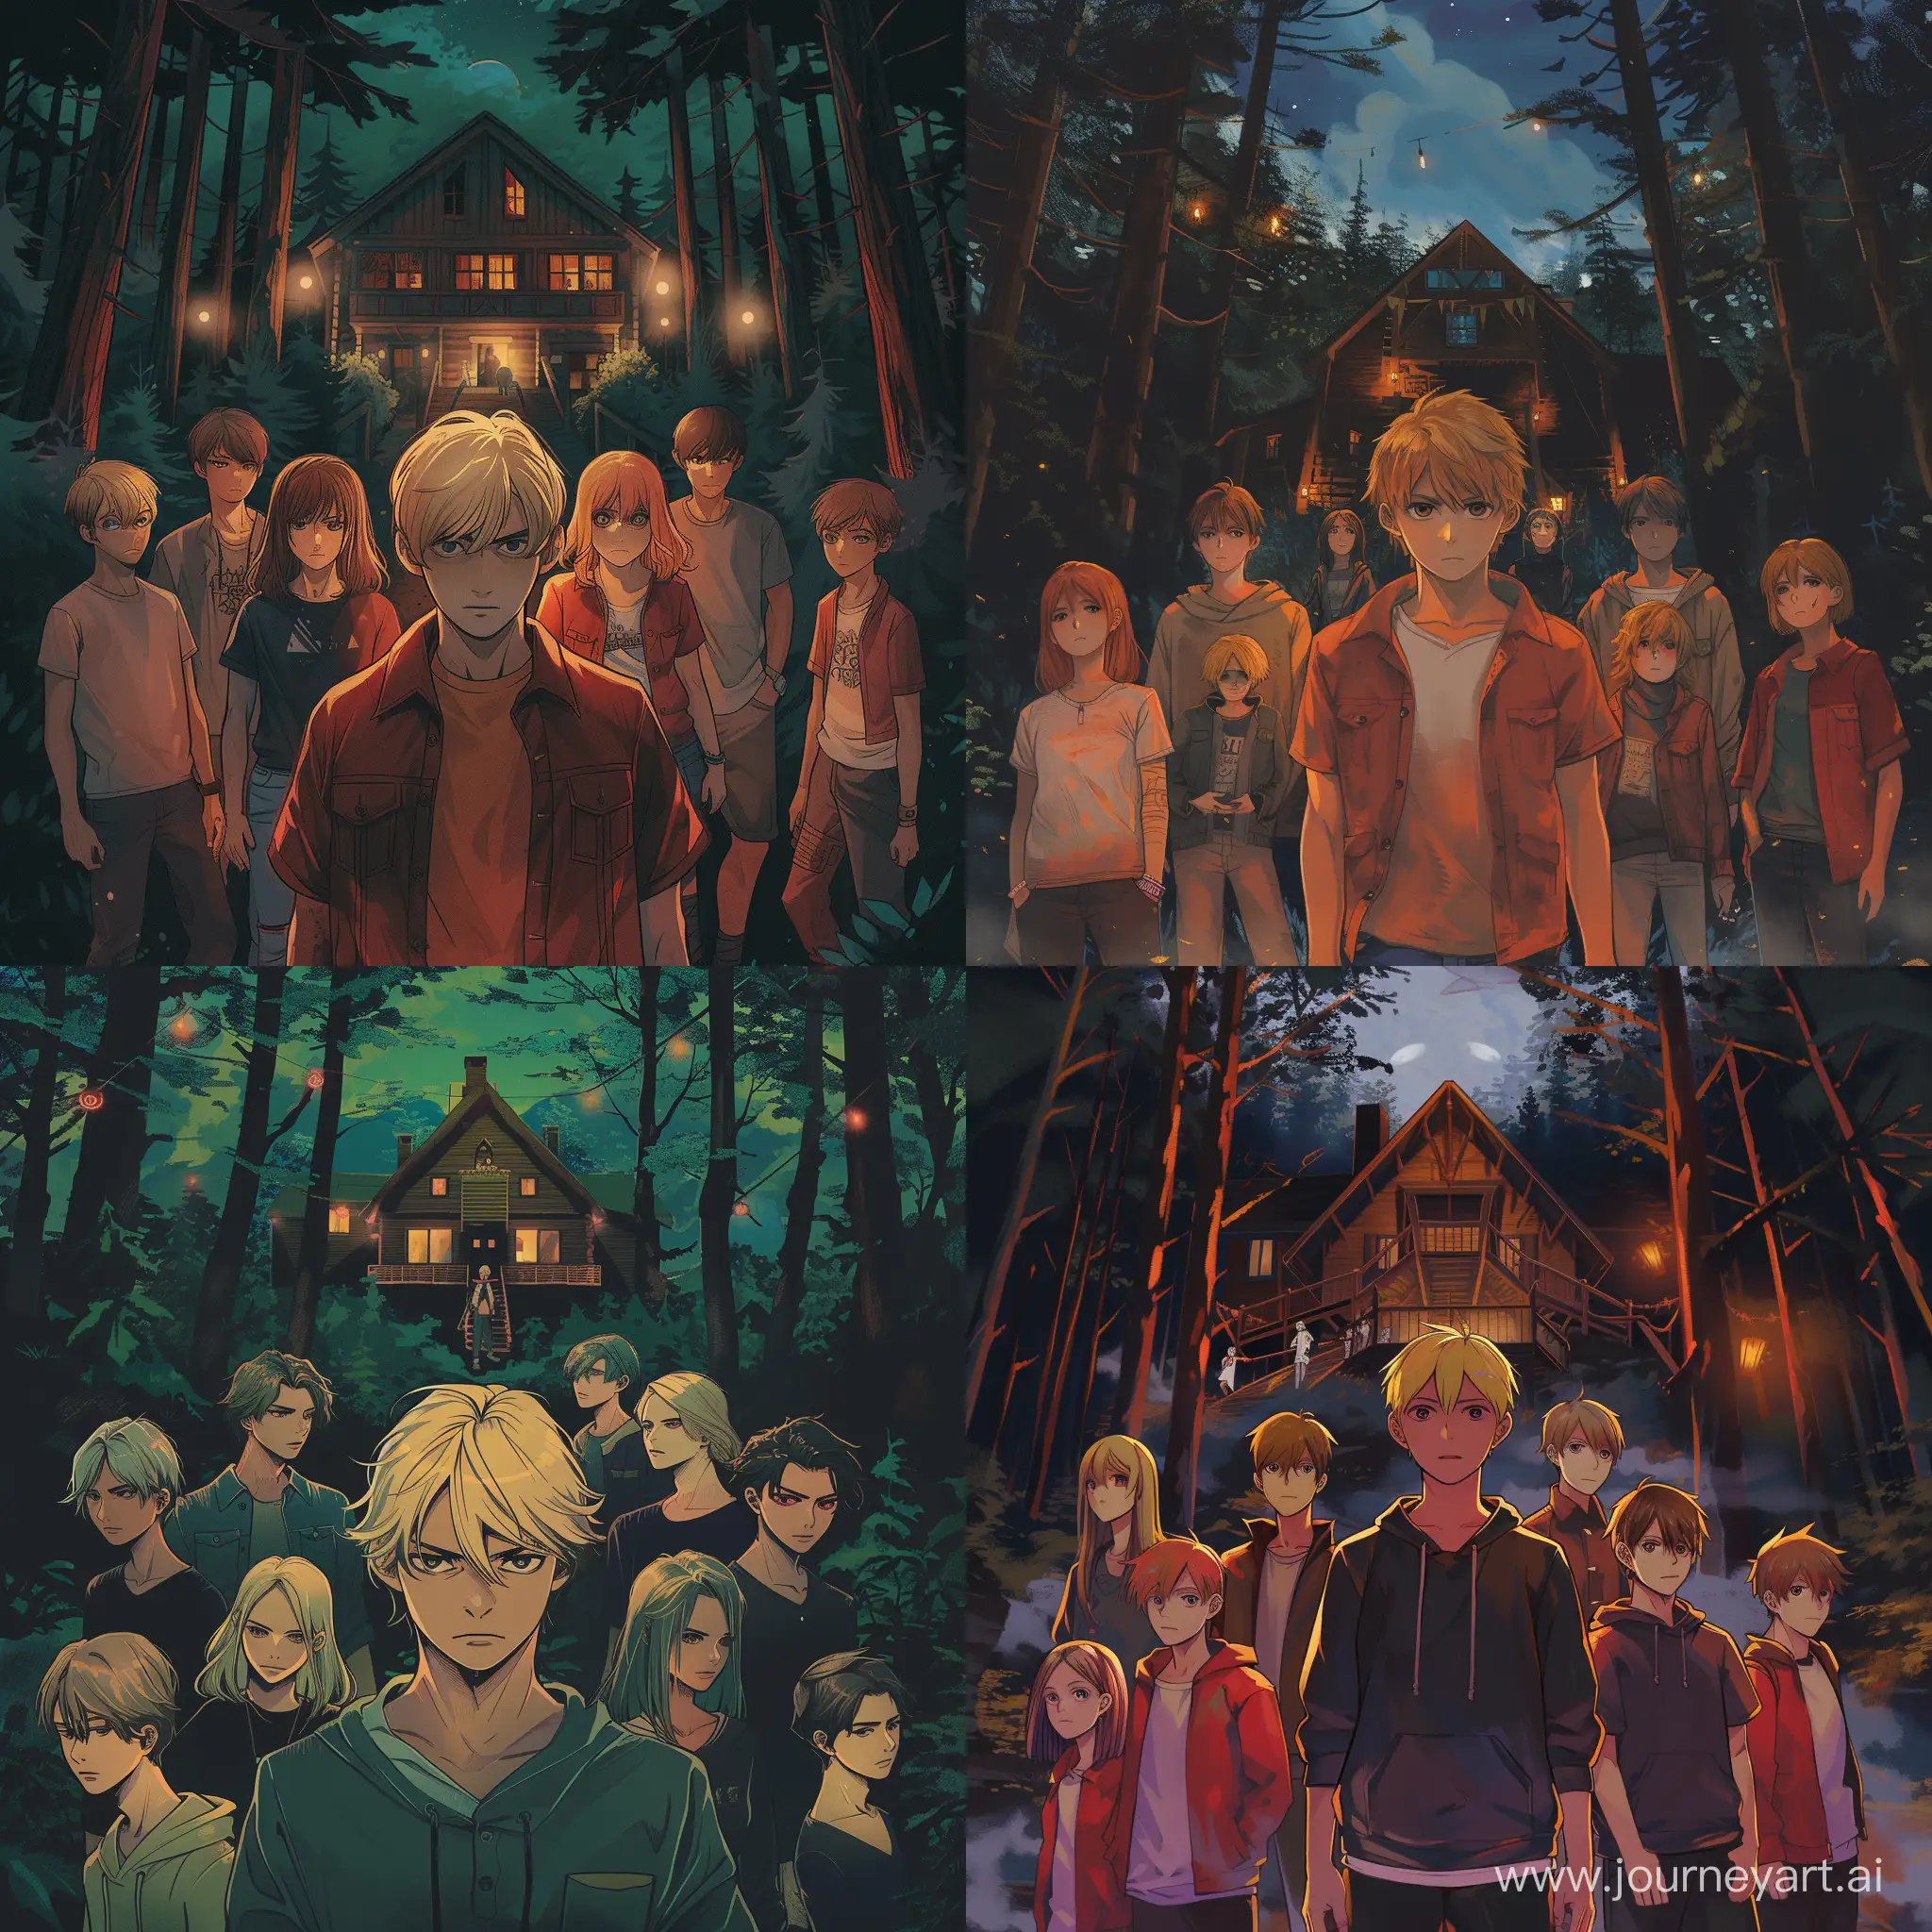 a cover for a book, horror, aesthetic, 11 friends, teenagers, six boys, five girls, forest, a lodge at the background, night, one boy in the middle with blonde hair, anime drawing, 18 years old, dark theme